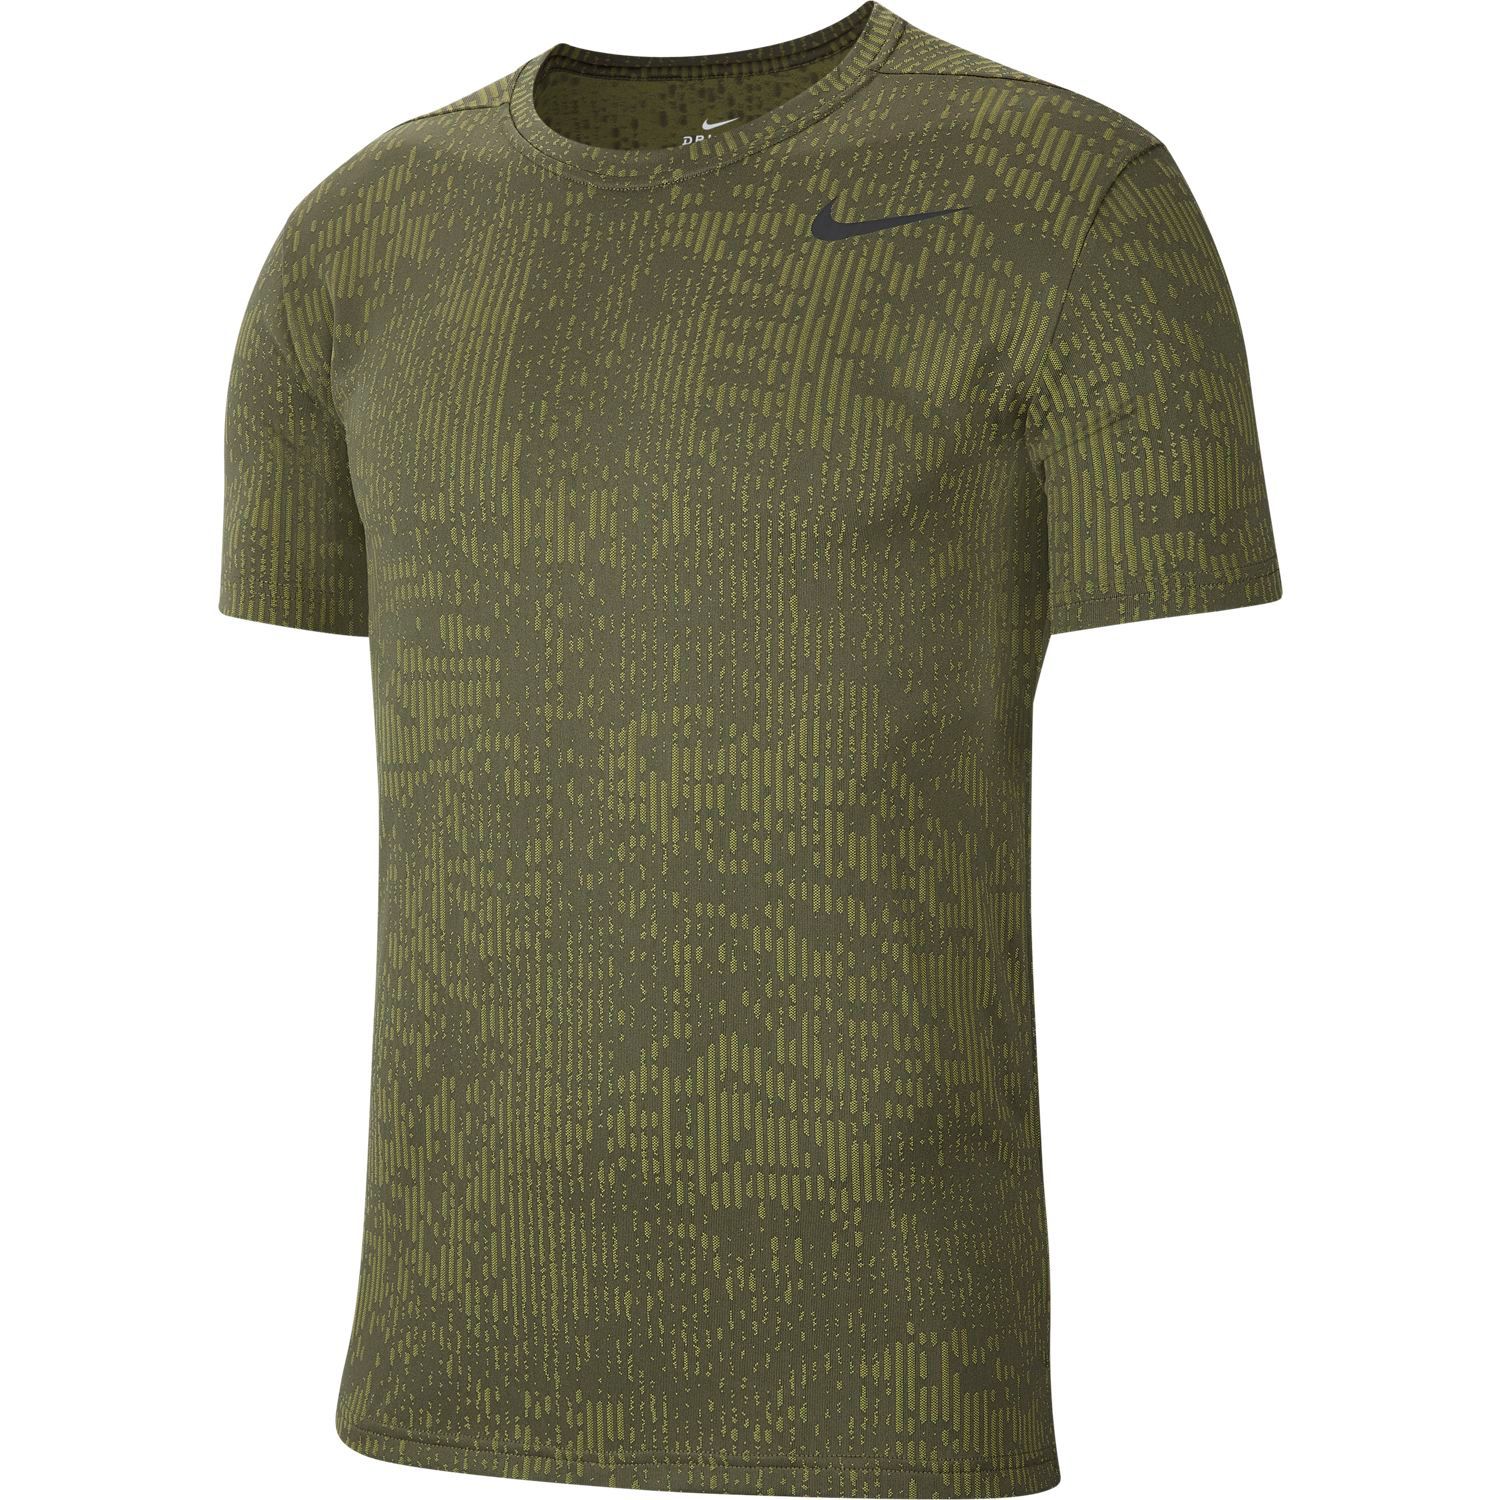 nike men's clothes clearance